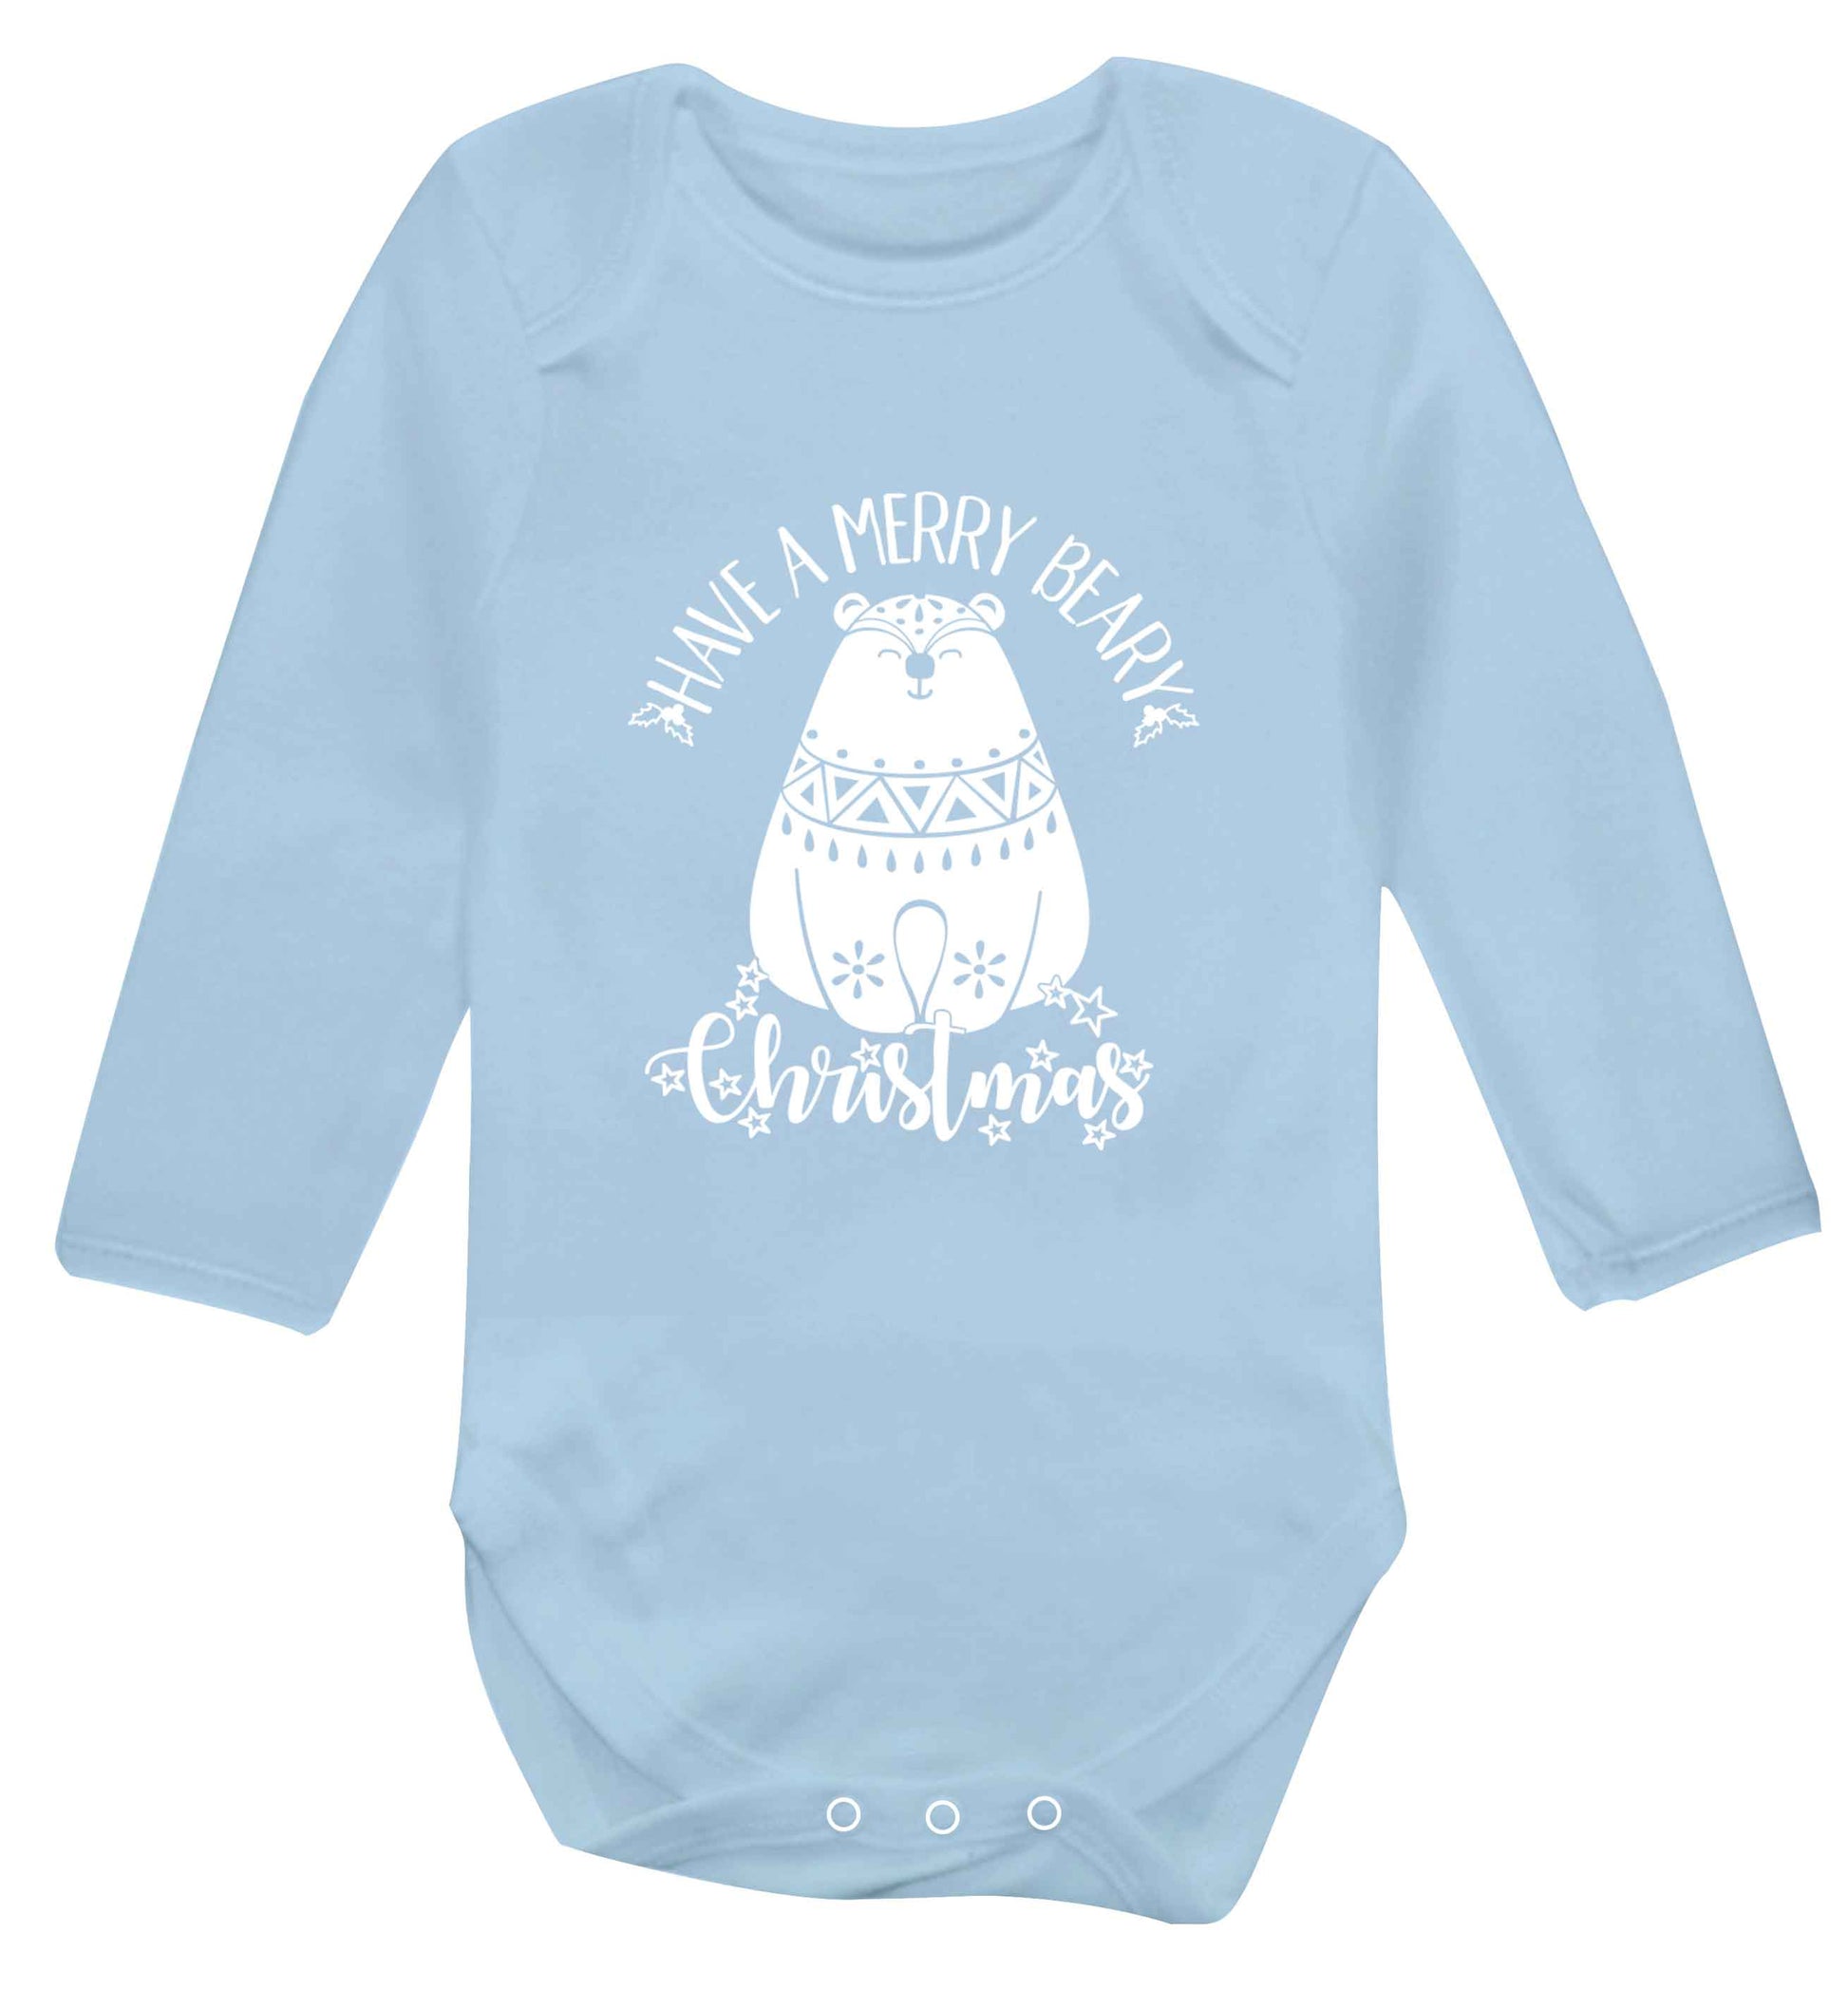 Have a merry beary Christmas Baby Vest long sleeved pale blue 6-12 months